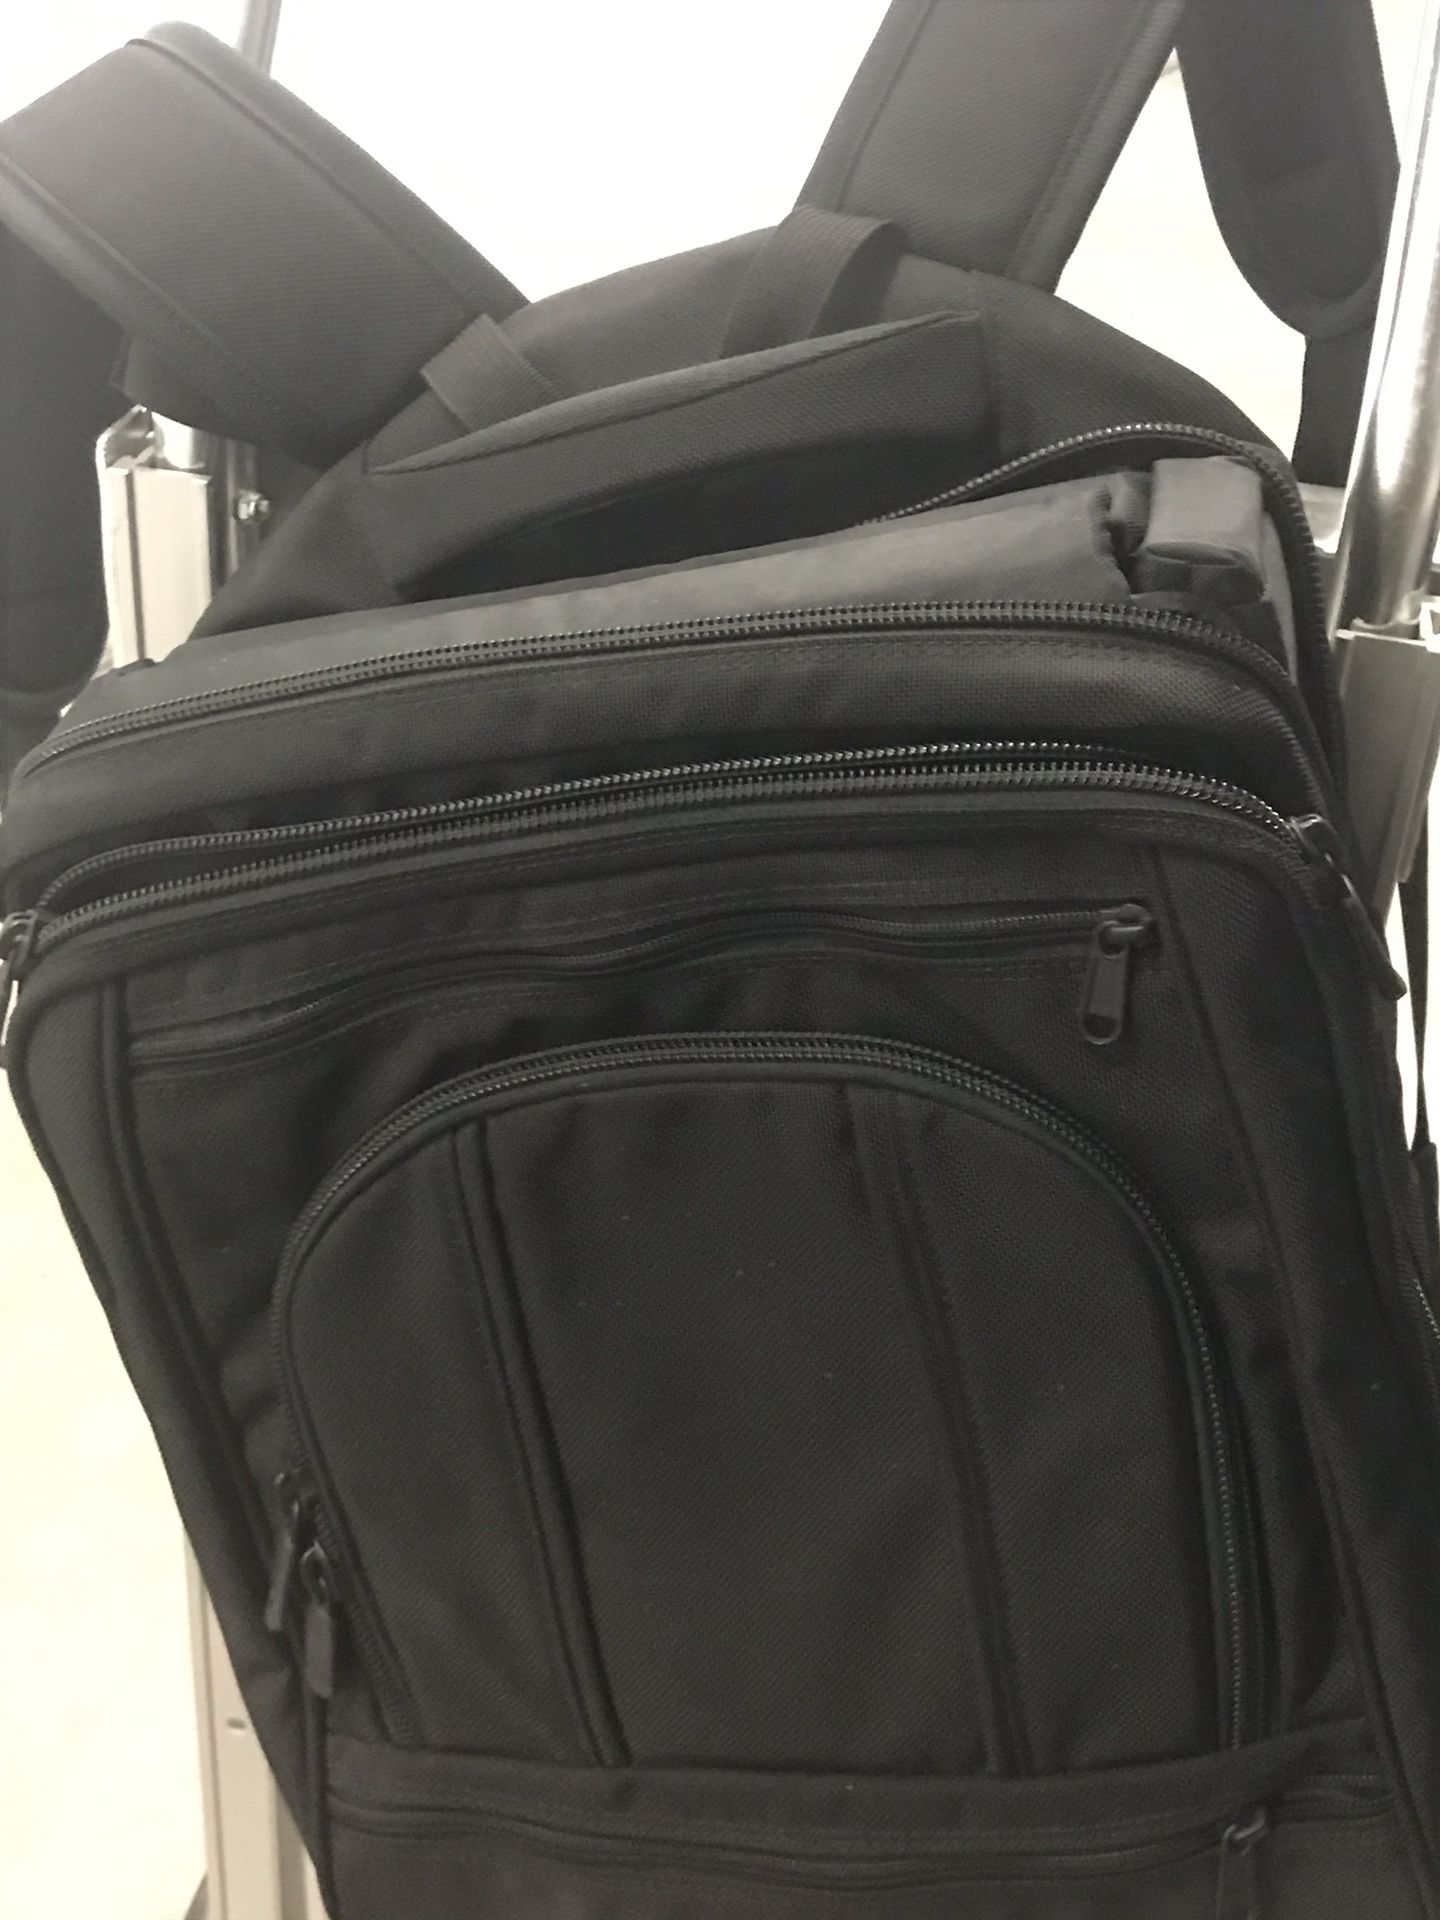 New laptop backpack